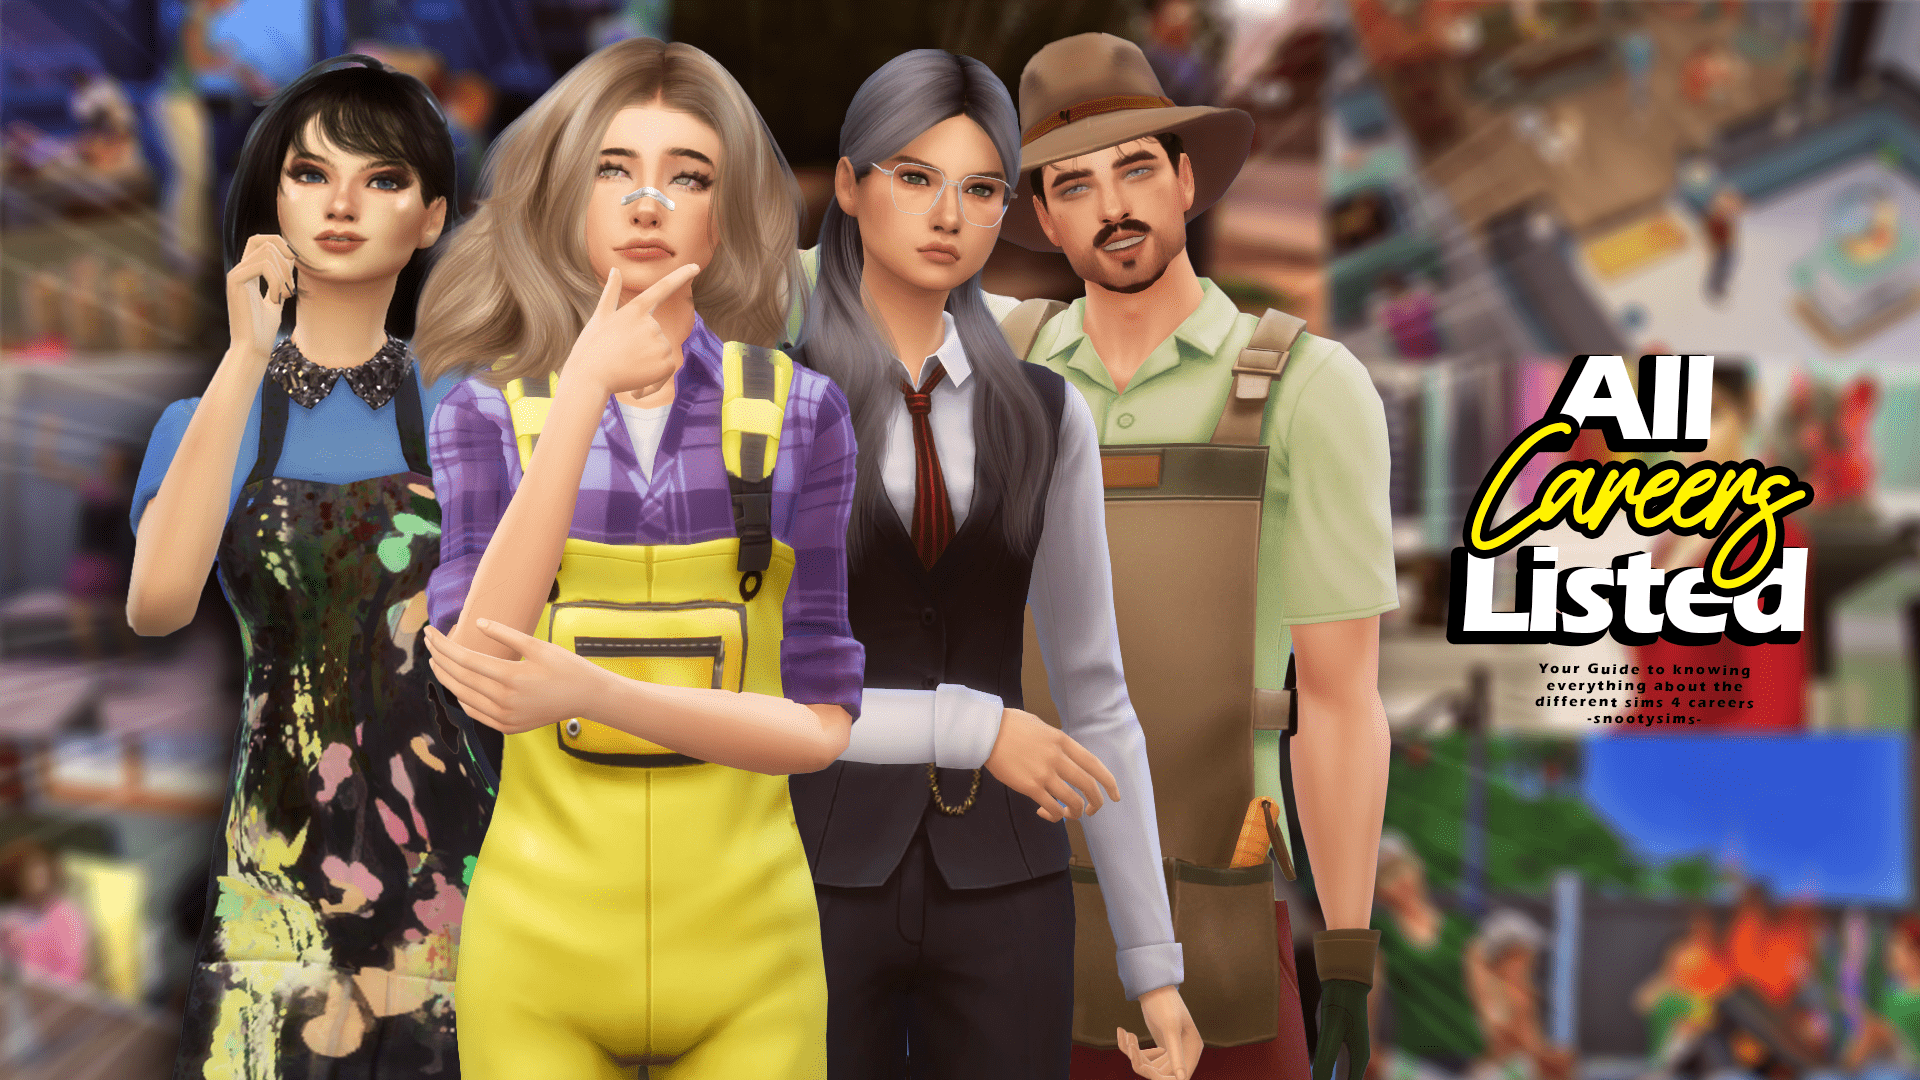 THE SIMS 4 GET TO WORK ACTIVE CAREERS GUIDE